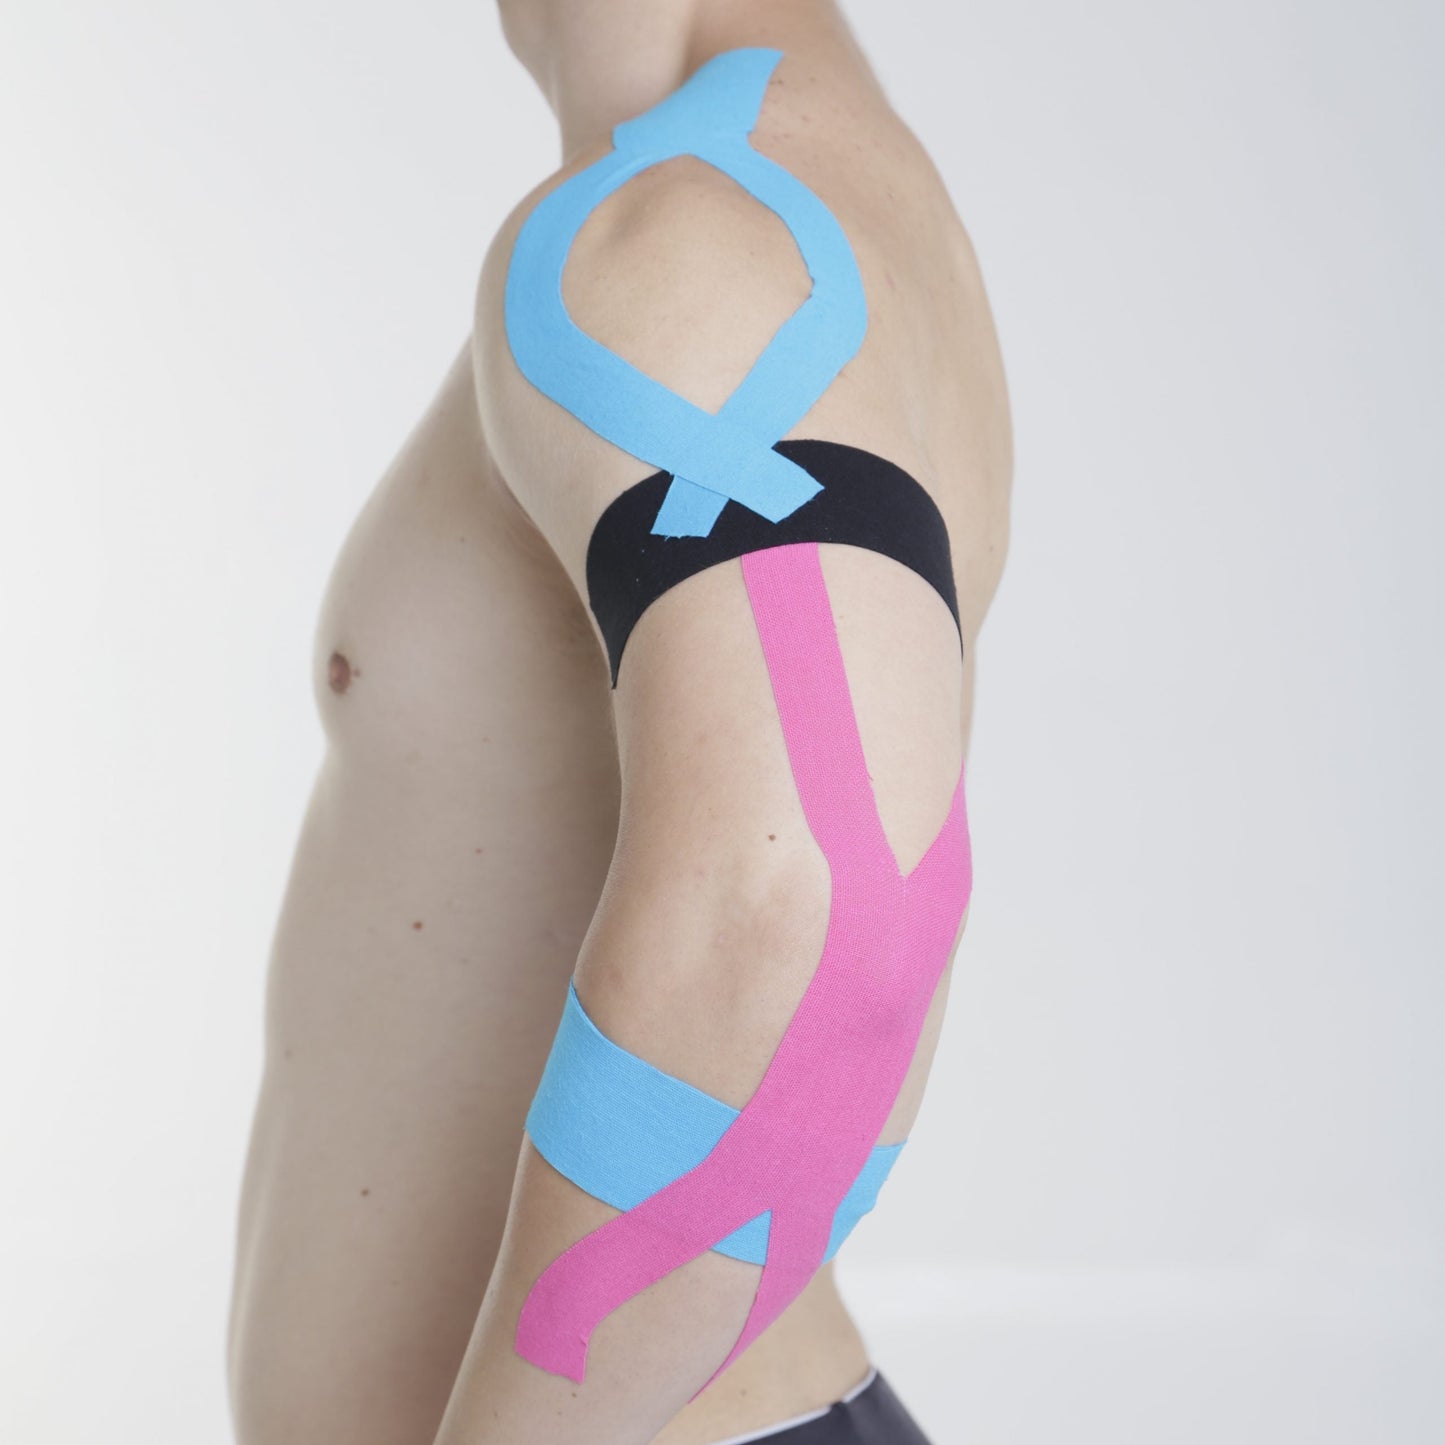 Kinesiology Tape 5cm x 5m, Pink (RRP £5.99)